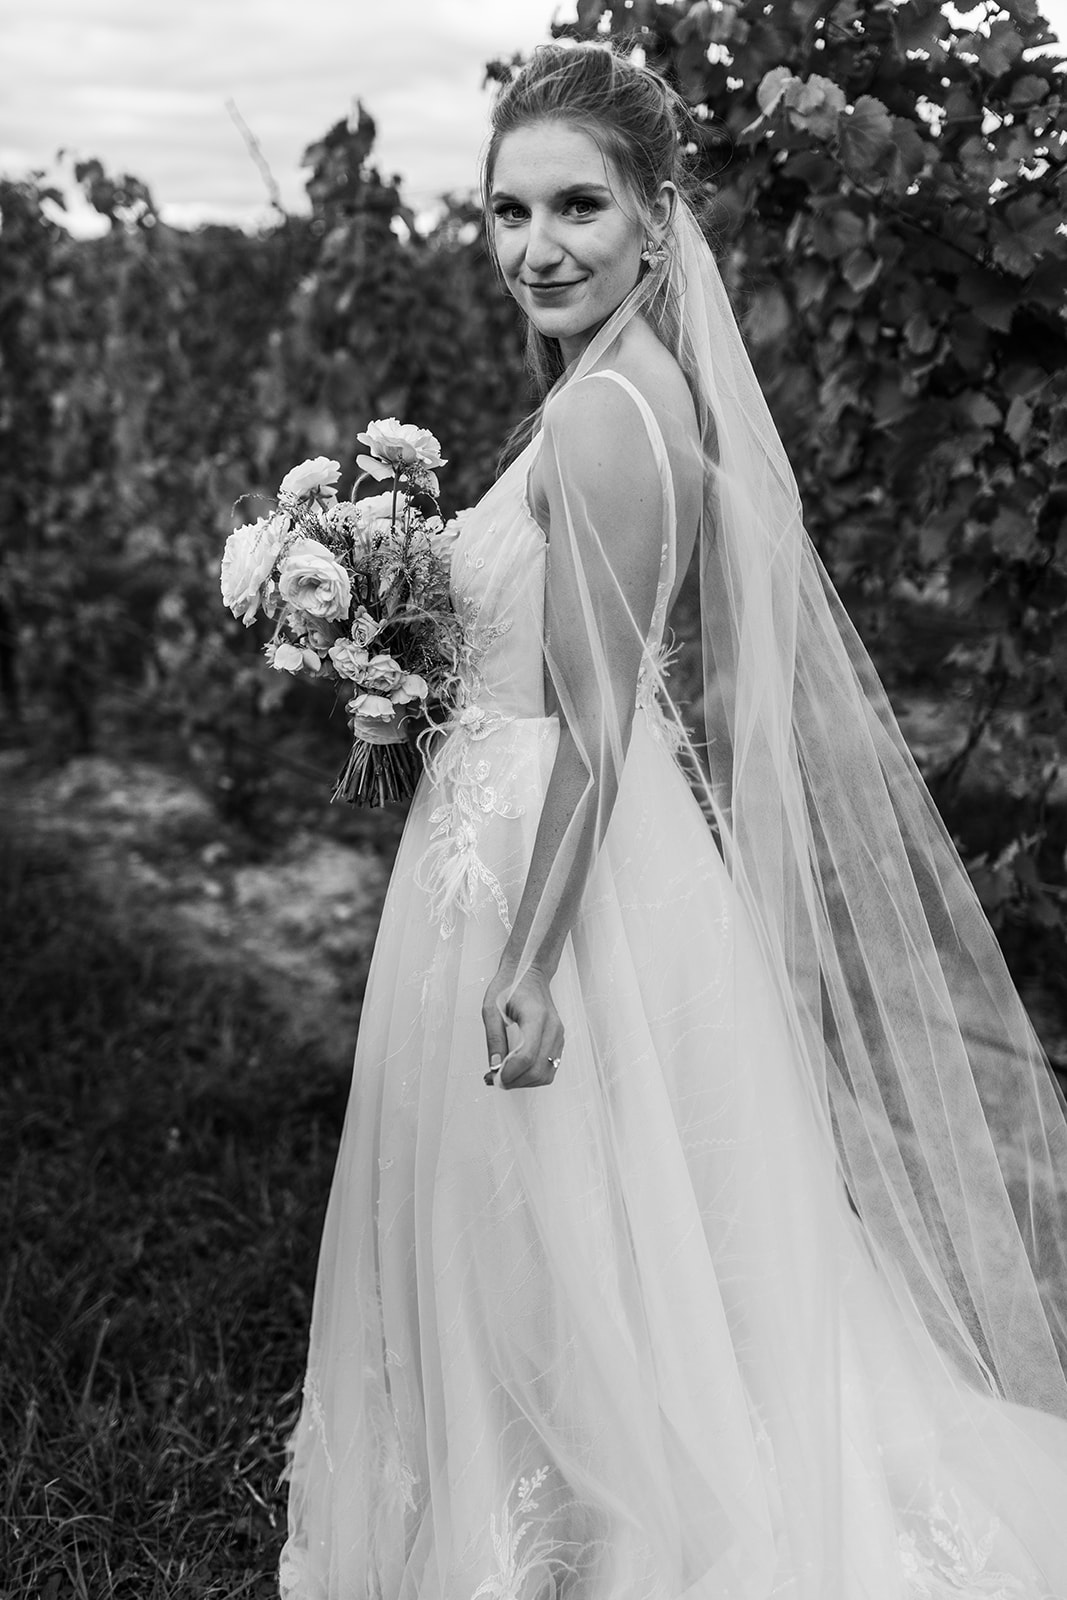 Bride wedding photos in vineyard with flower bouquet and long veil